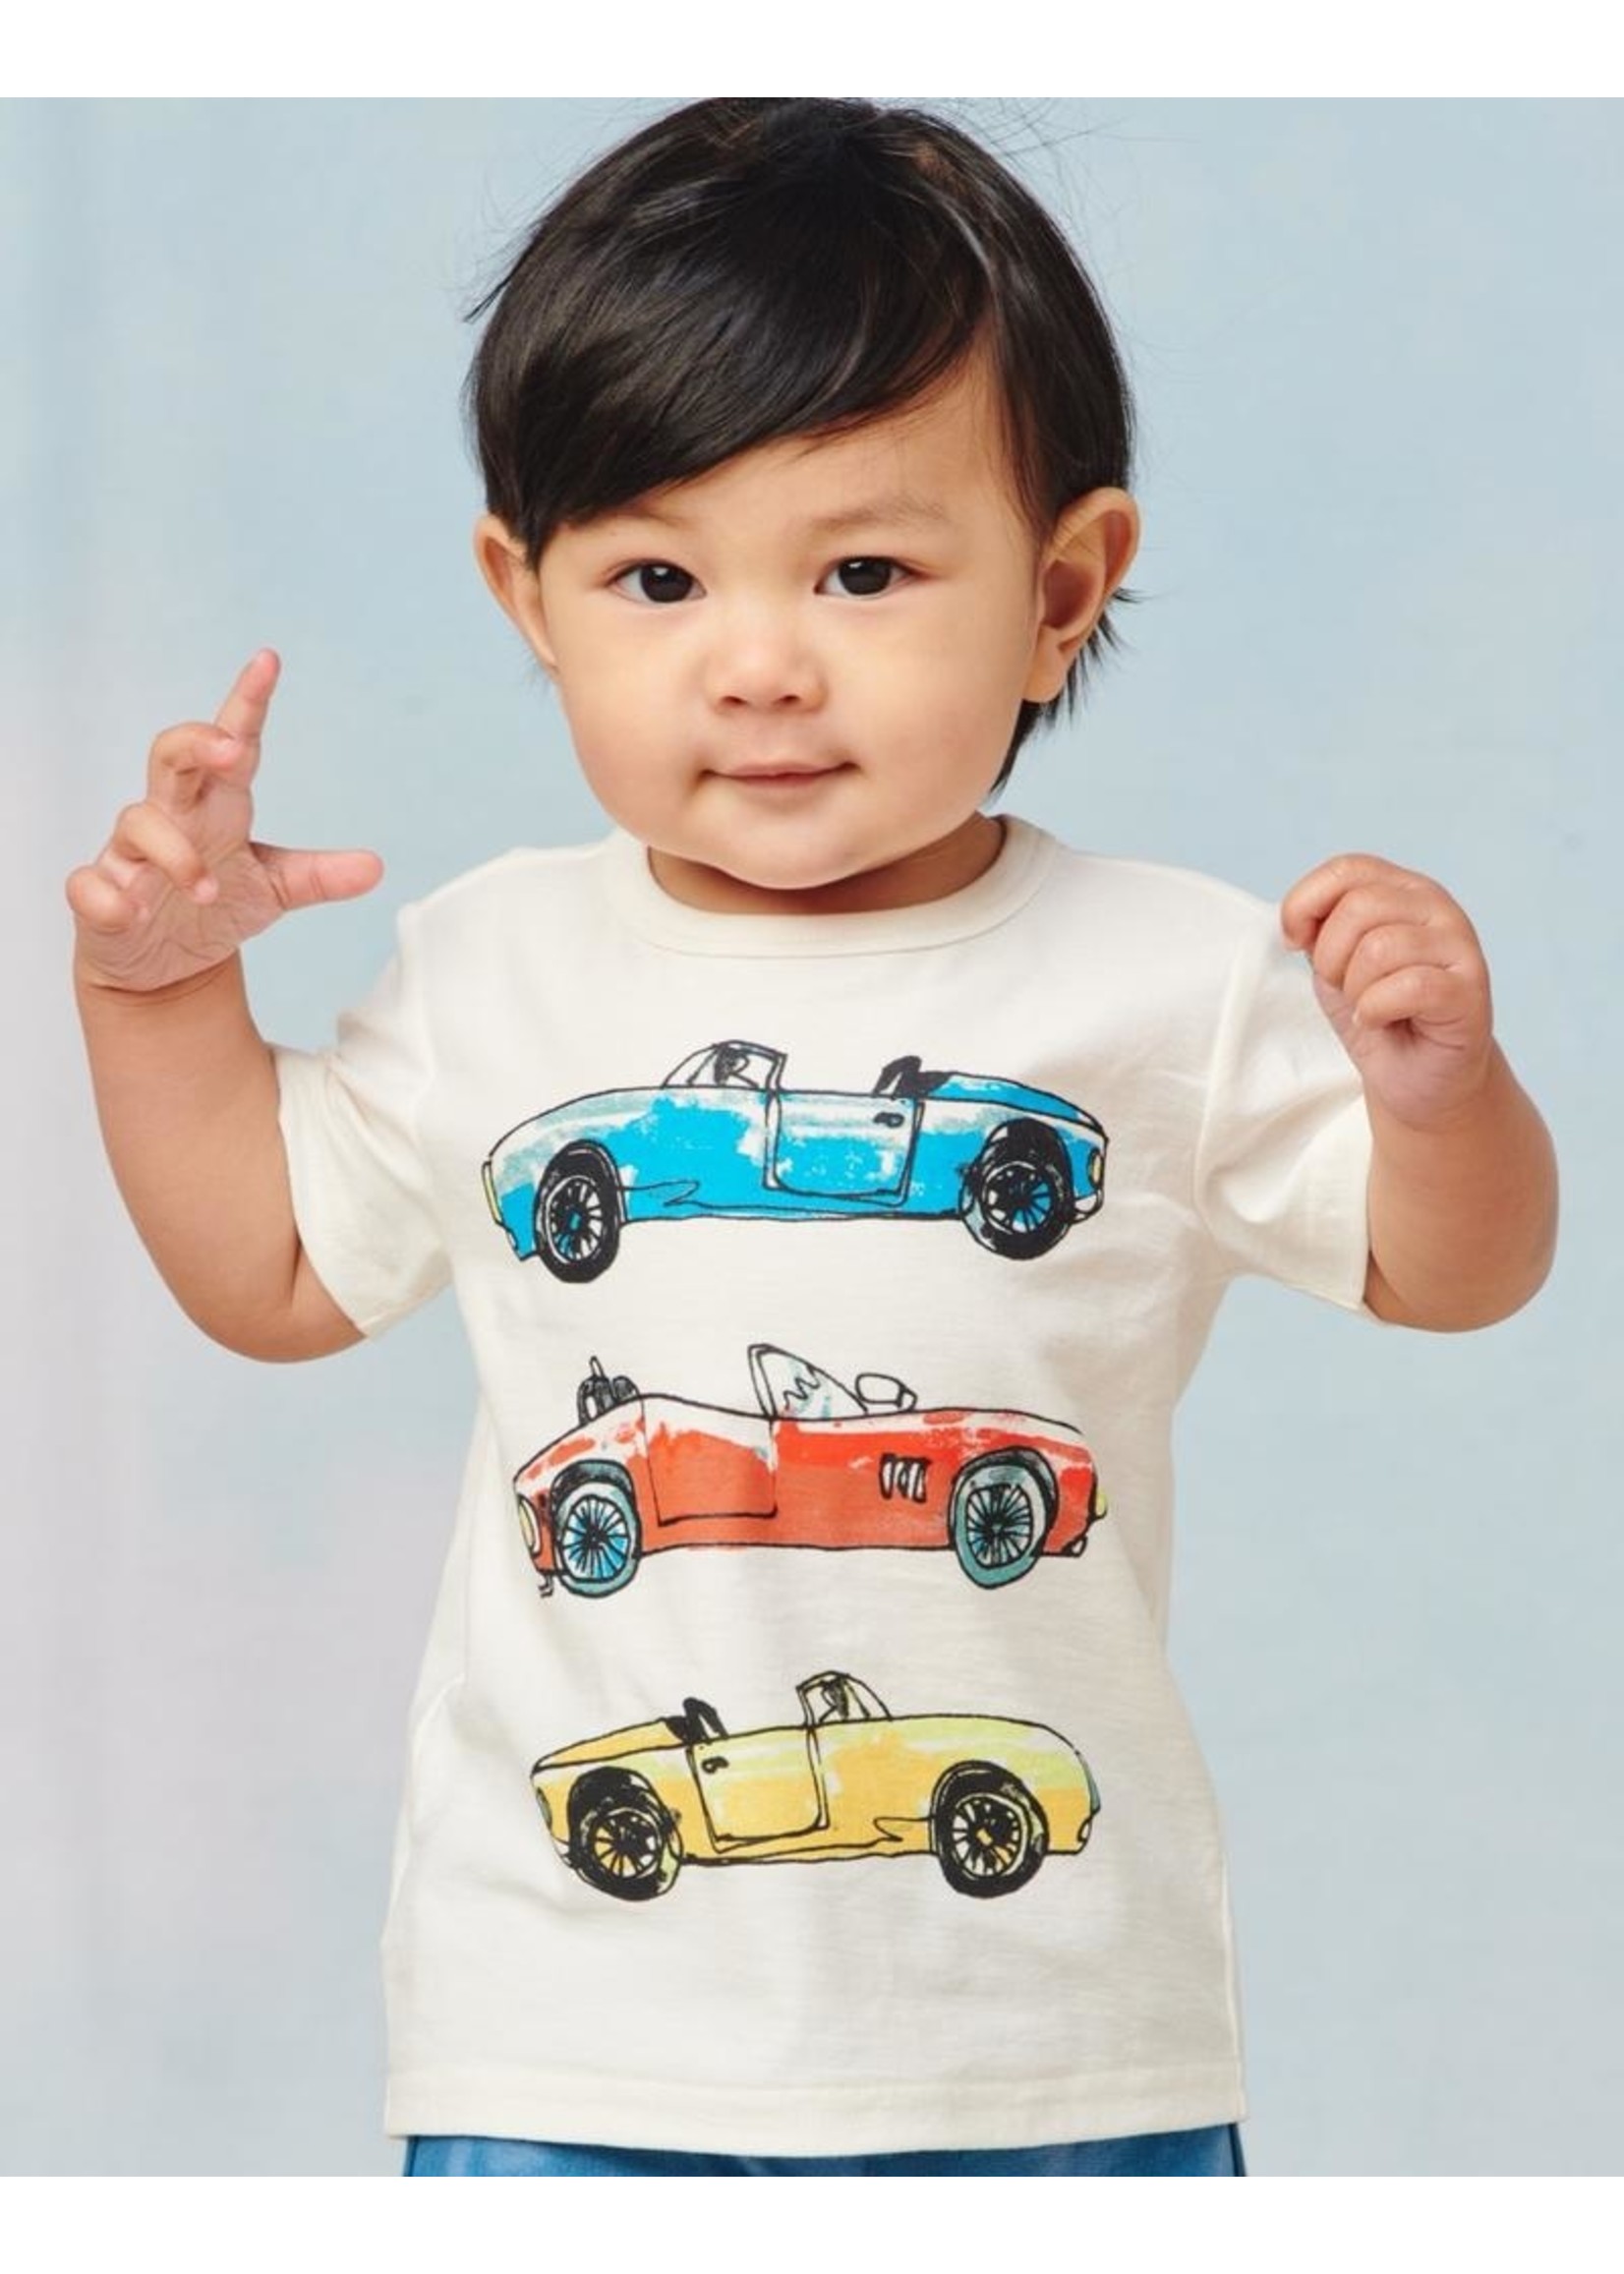 Tea Collection Tea Collection, Fast Car Baby Graphic Tee